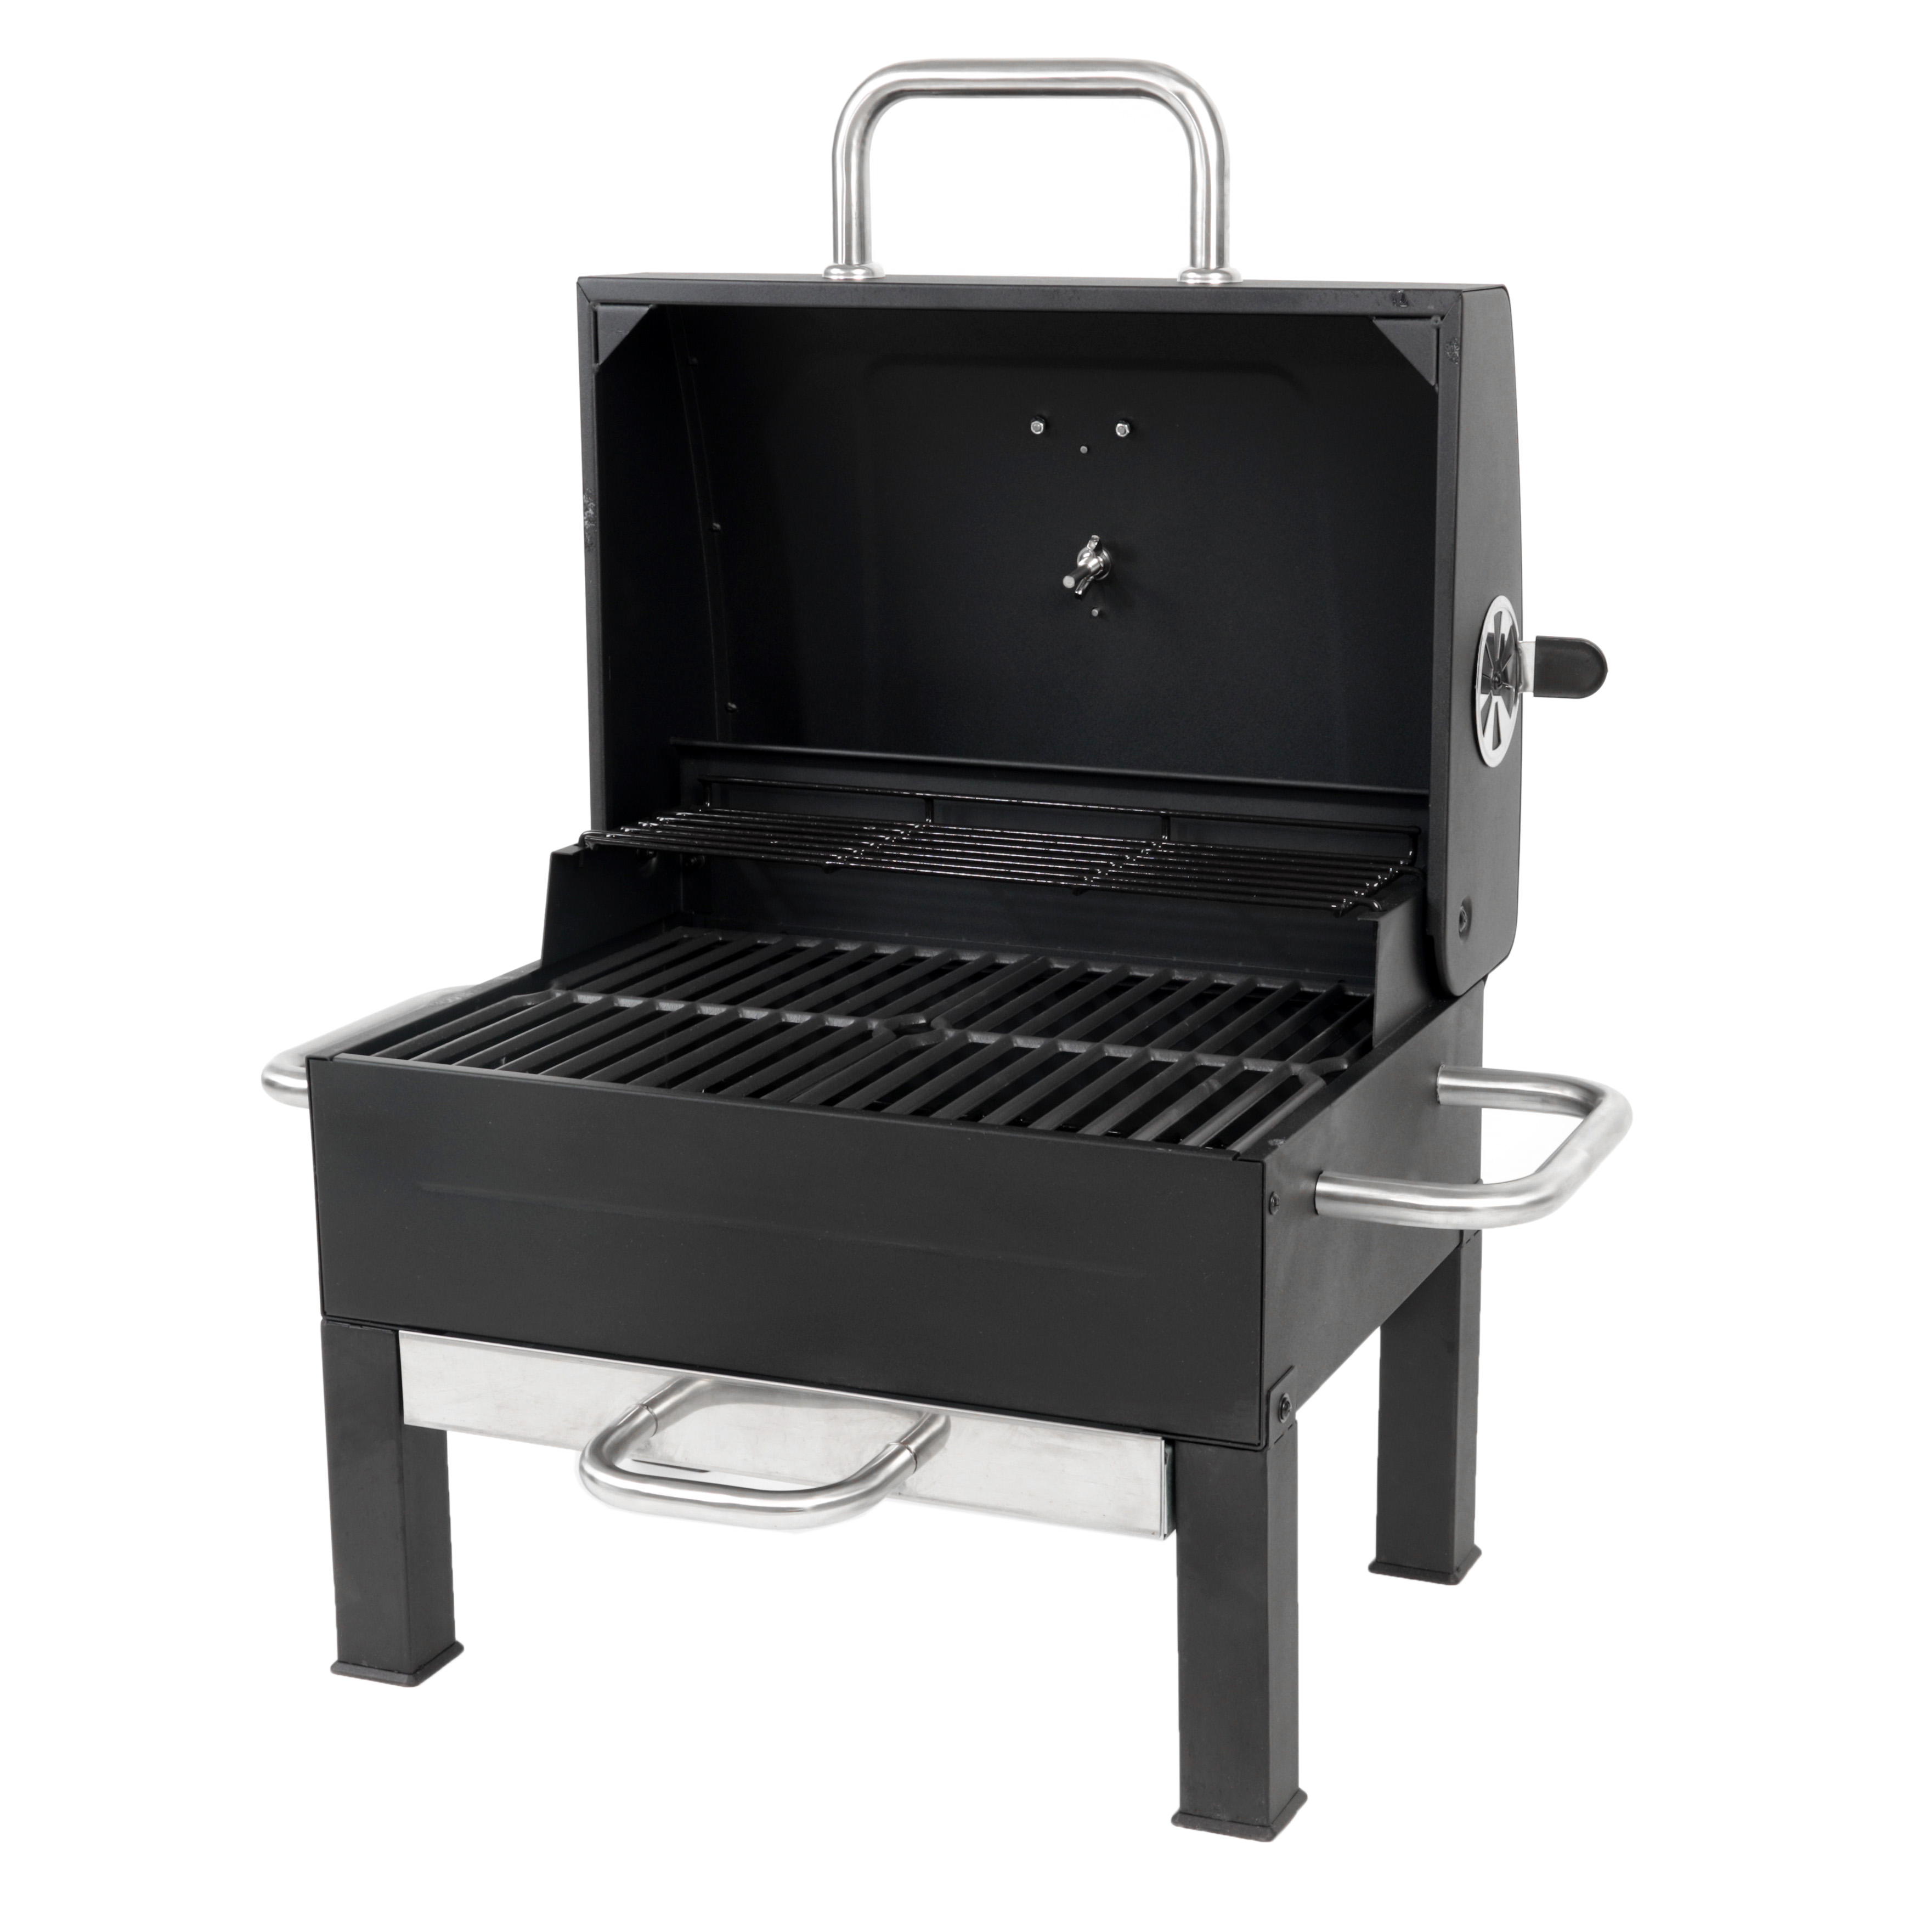 Expert Grill Premium Portable Charcoal Grill, Black and Stainless Steel - image 6 of 18